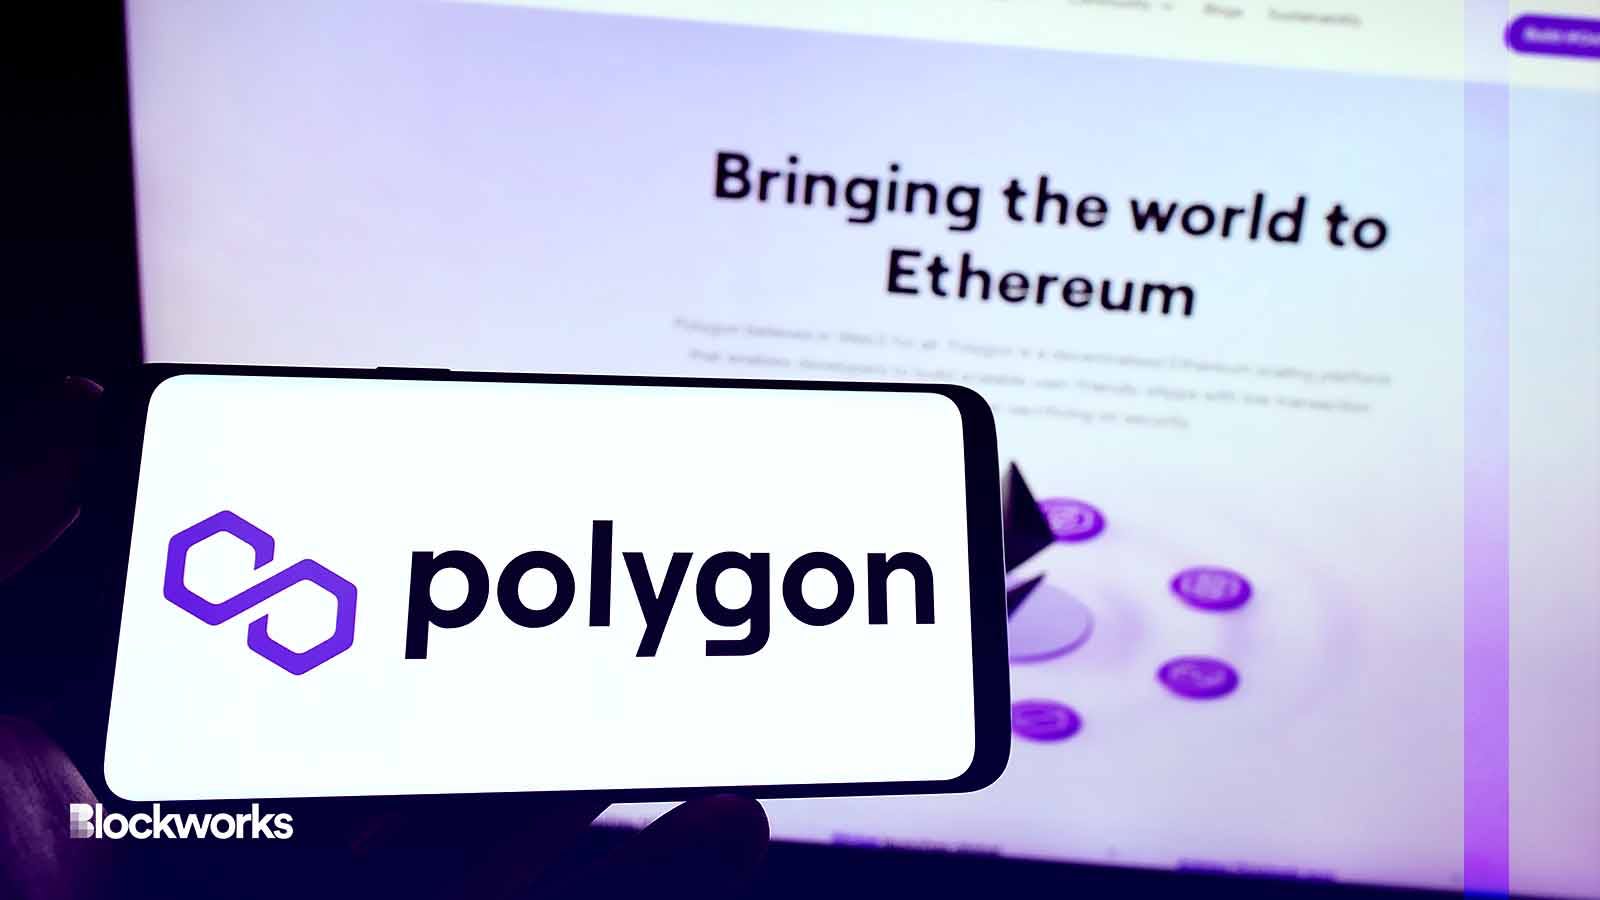 Not so optimistic? Polygon 2.0 is all about zero-proofs